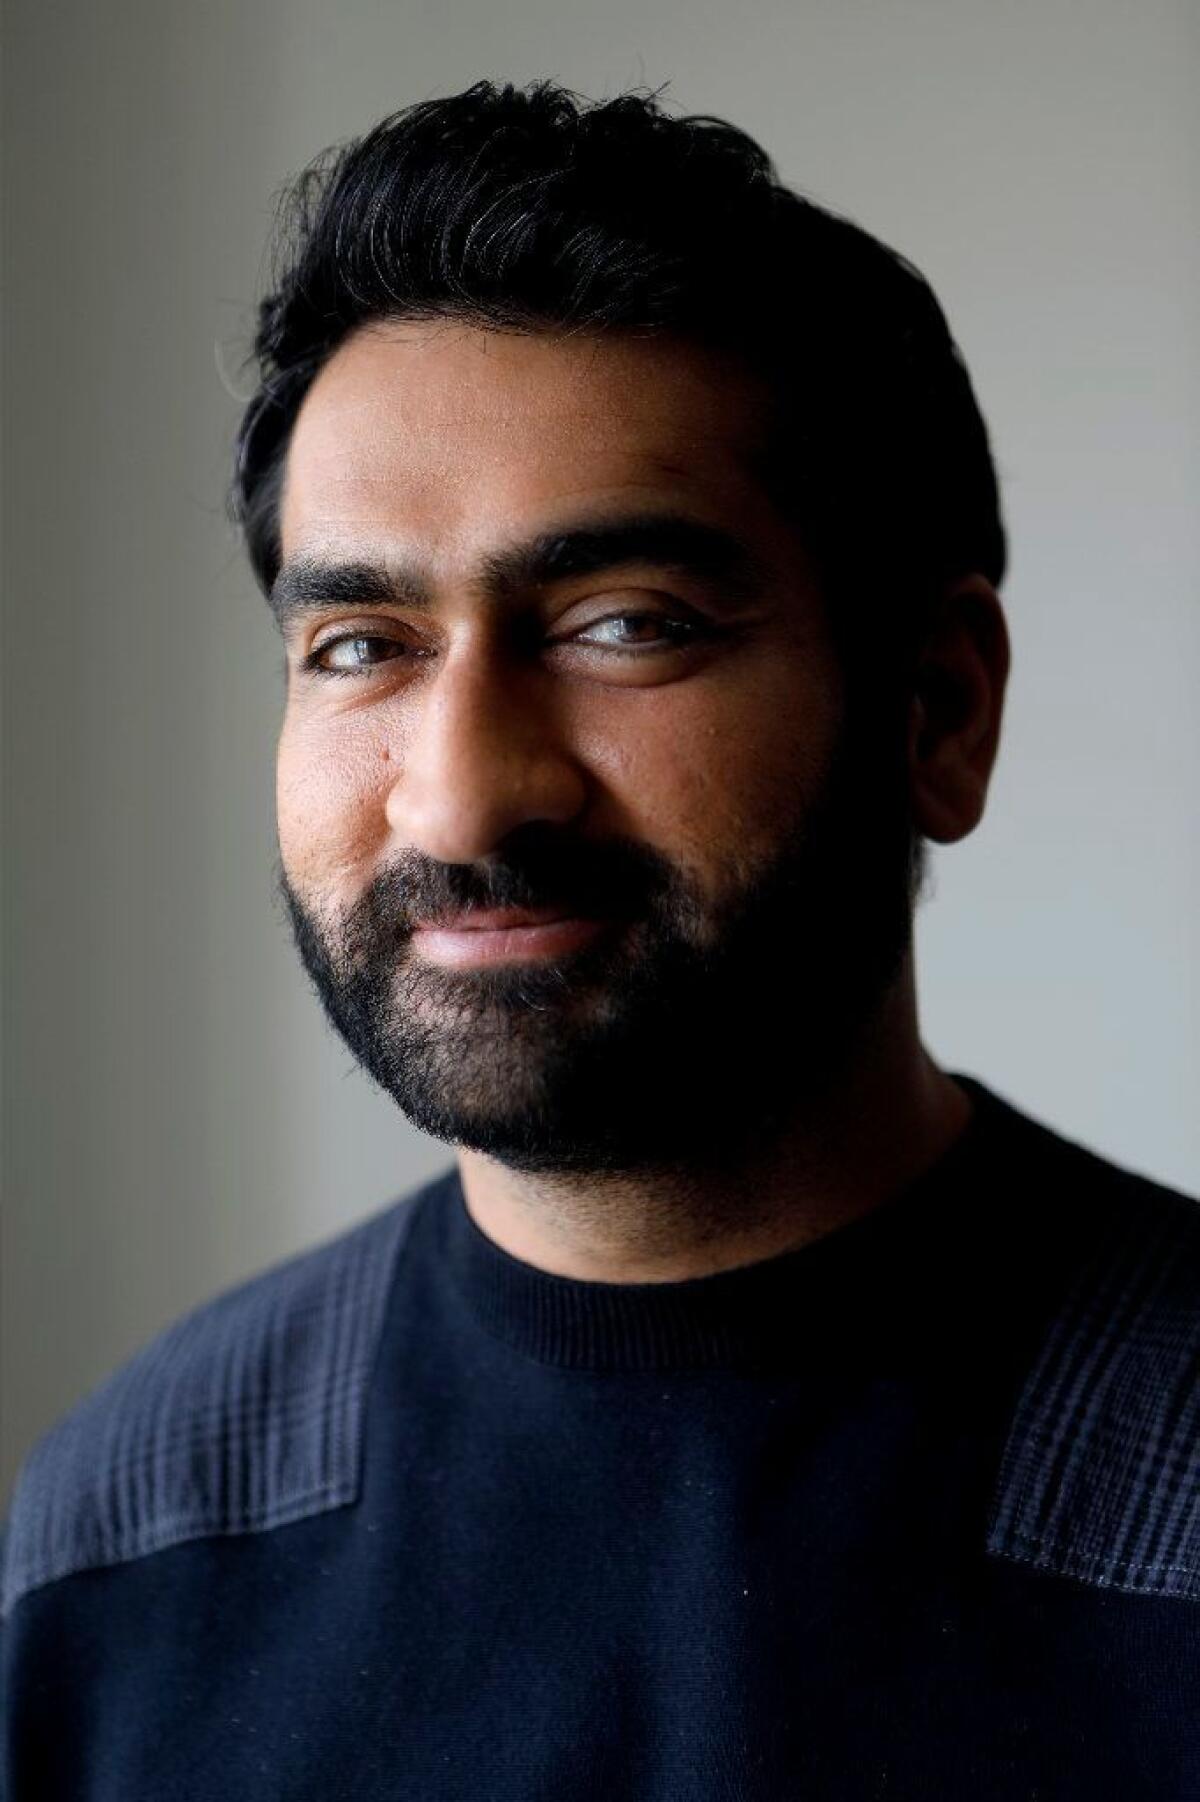 Oscar-nominated Kumail Nanjiani stars as Stu, whose life gets upturned when Bautista's Vic jumps in his Uber.